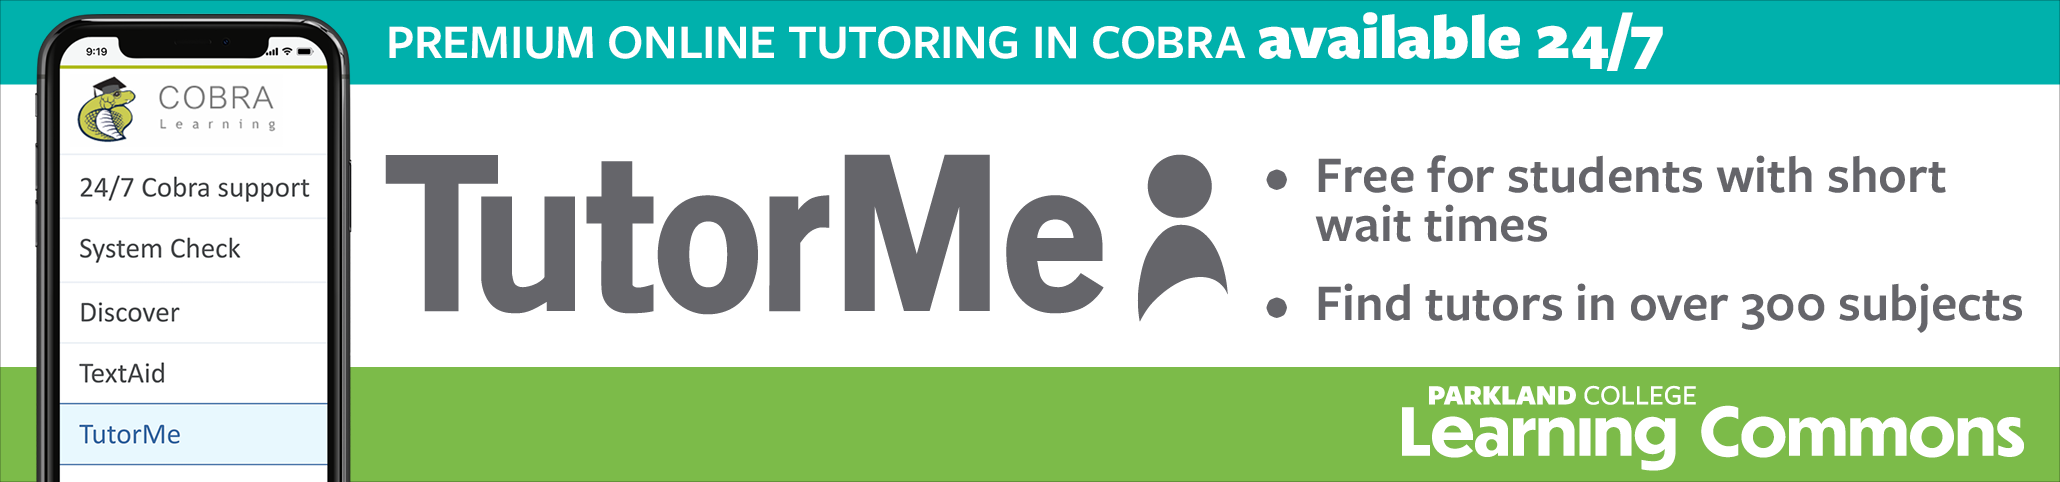 TutorMe online tutoring available on Cobra through the Learning Commons